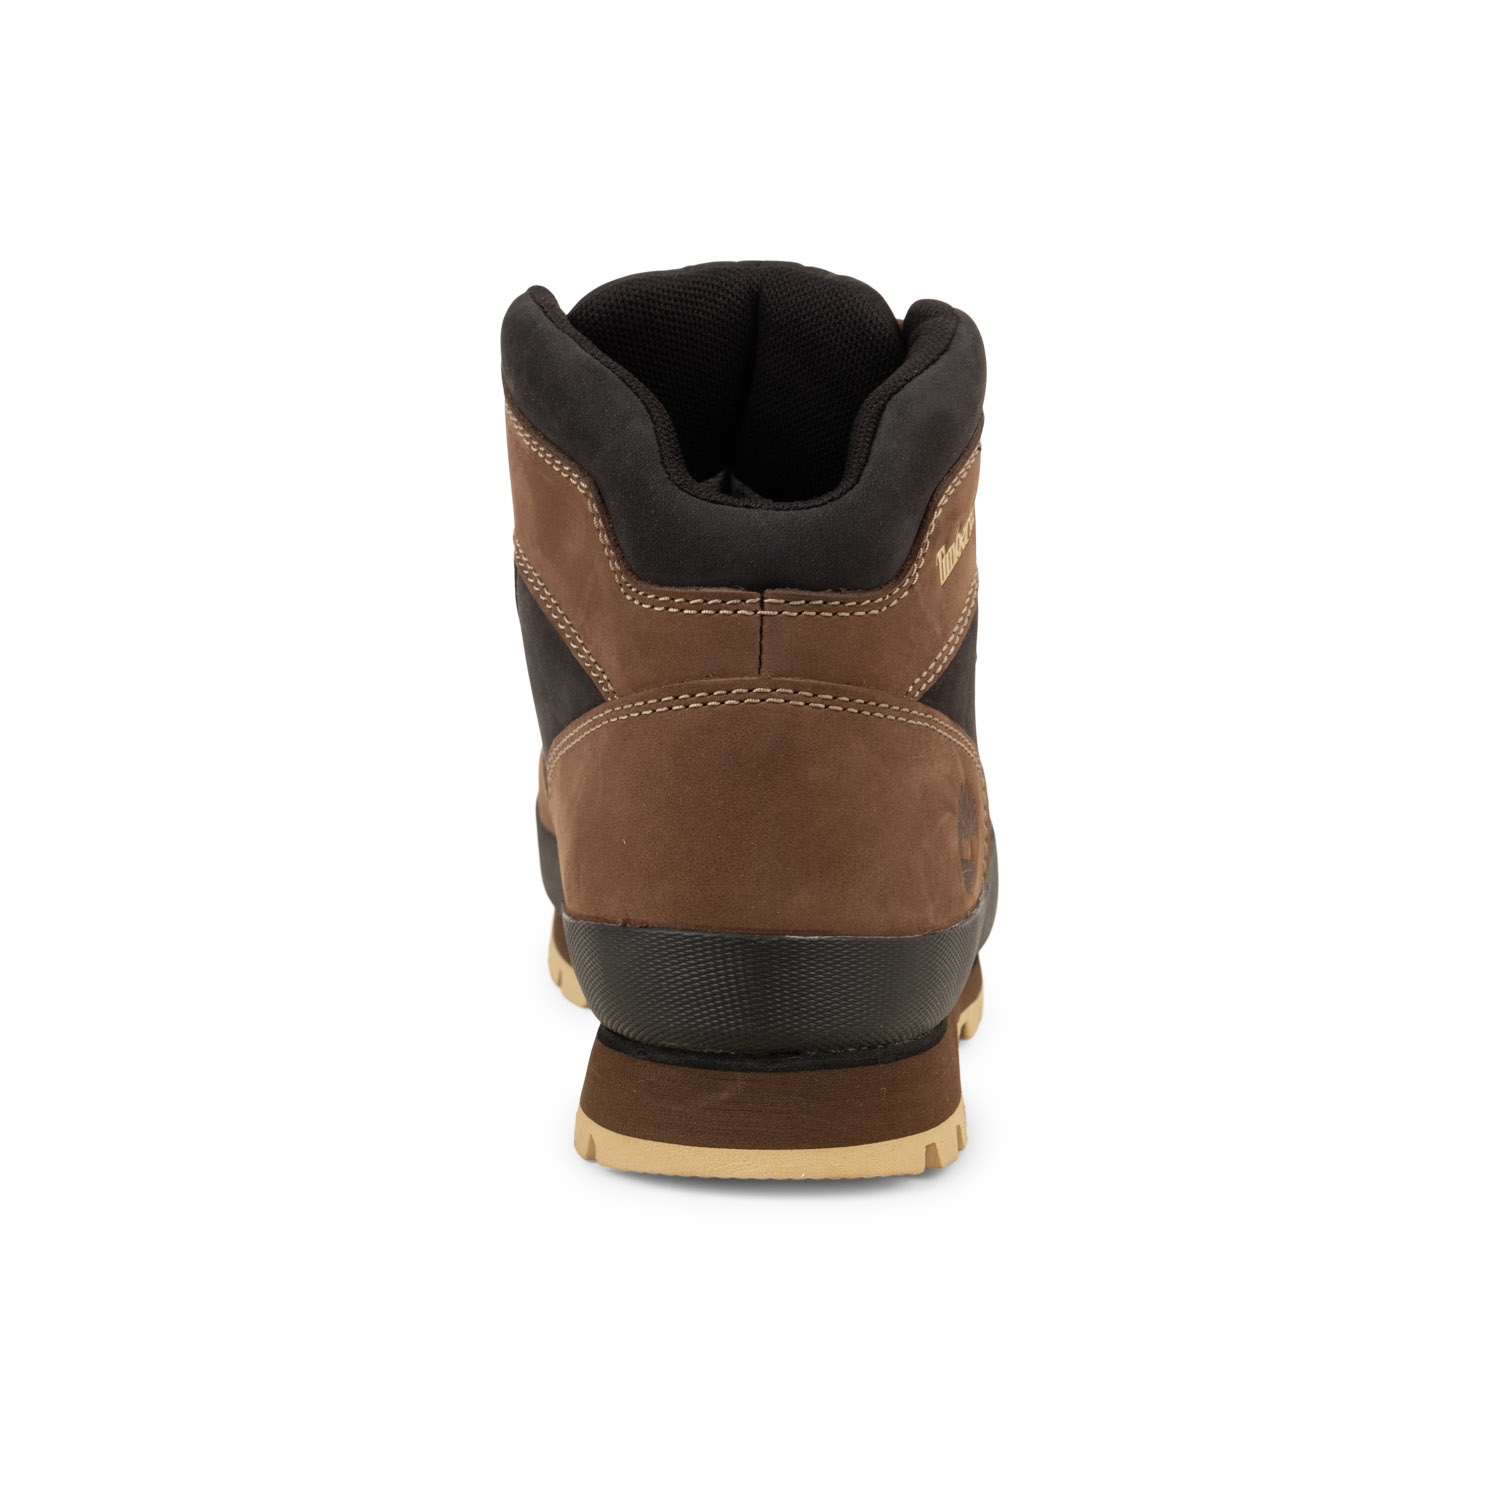 03 - EURO HIKER - TIMBERLAND - Chaussures à lacets - Nubuck